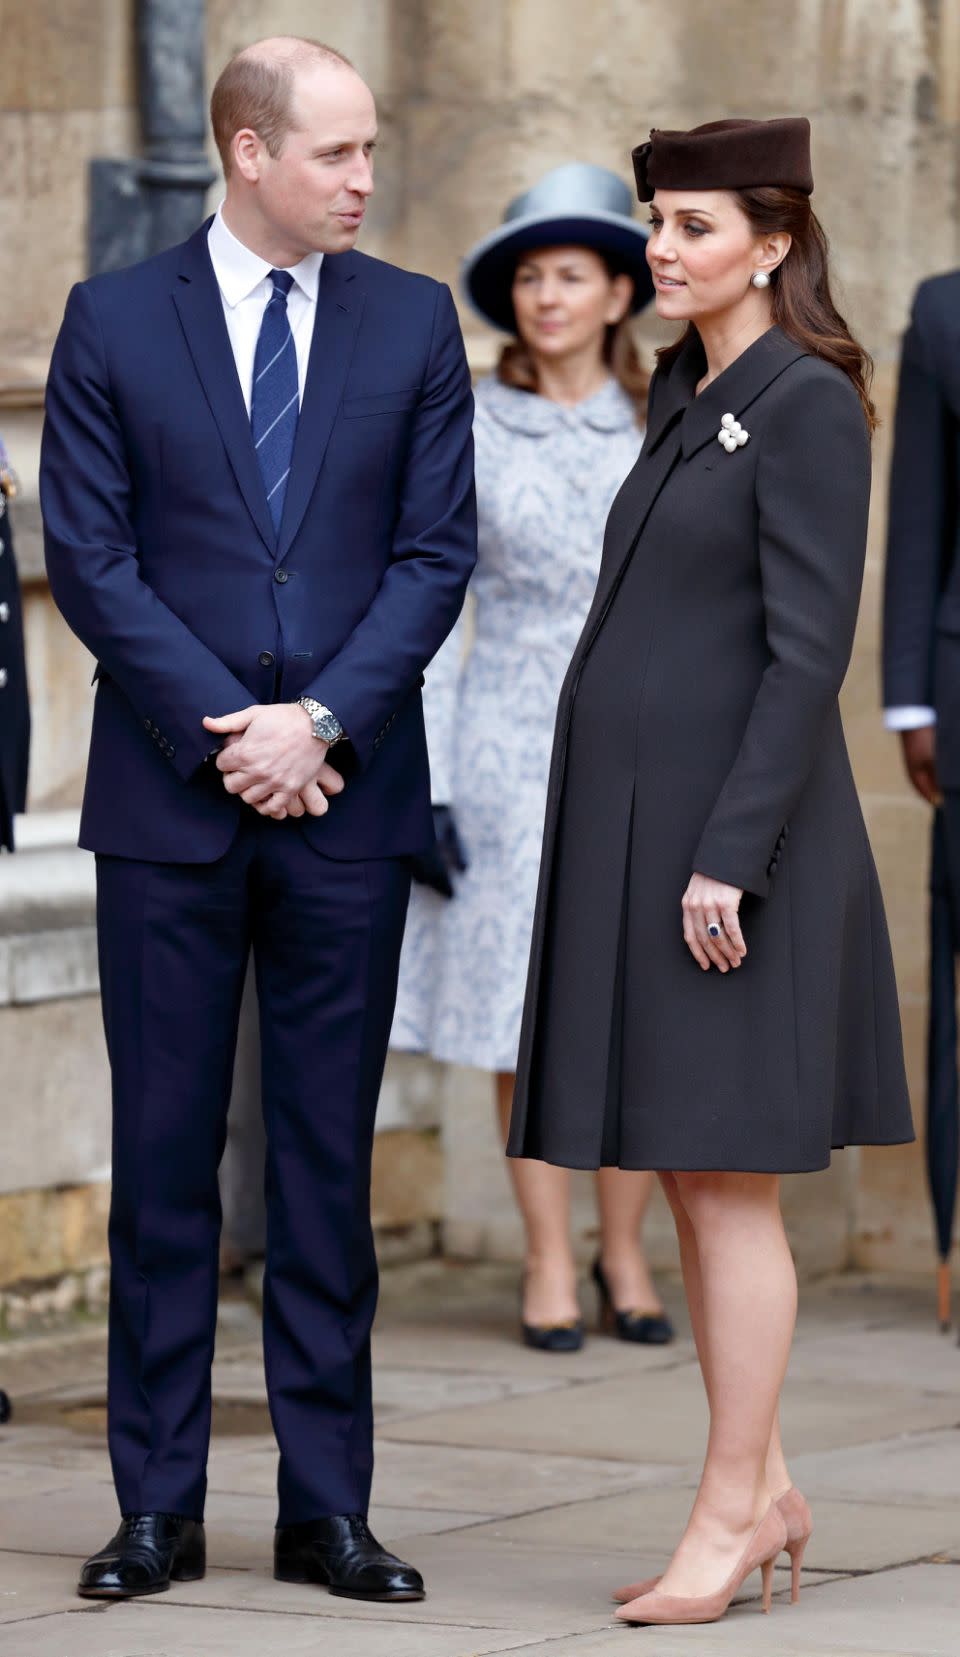 A heavily pregnant Kate Middleton arrived with Prince William. Photo: Getty Images